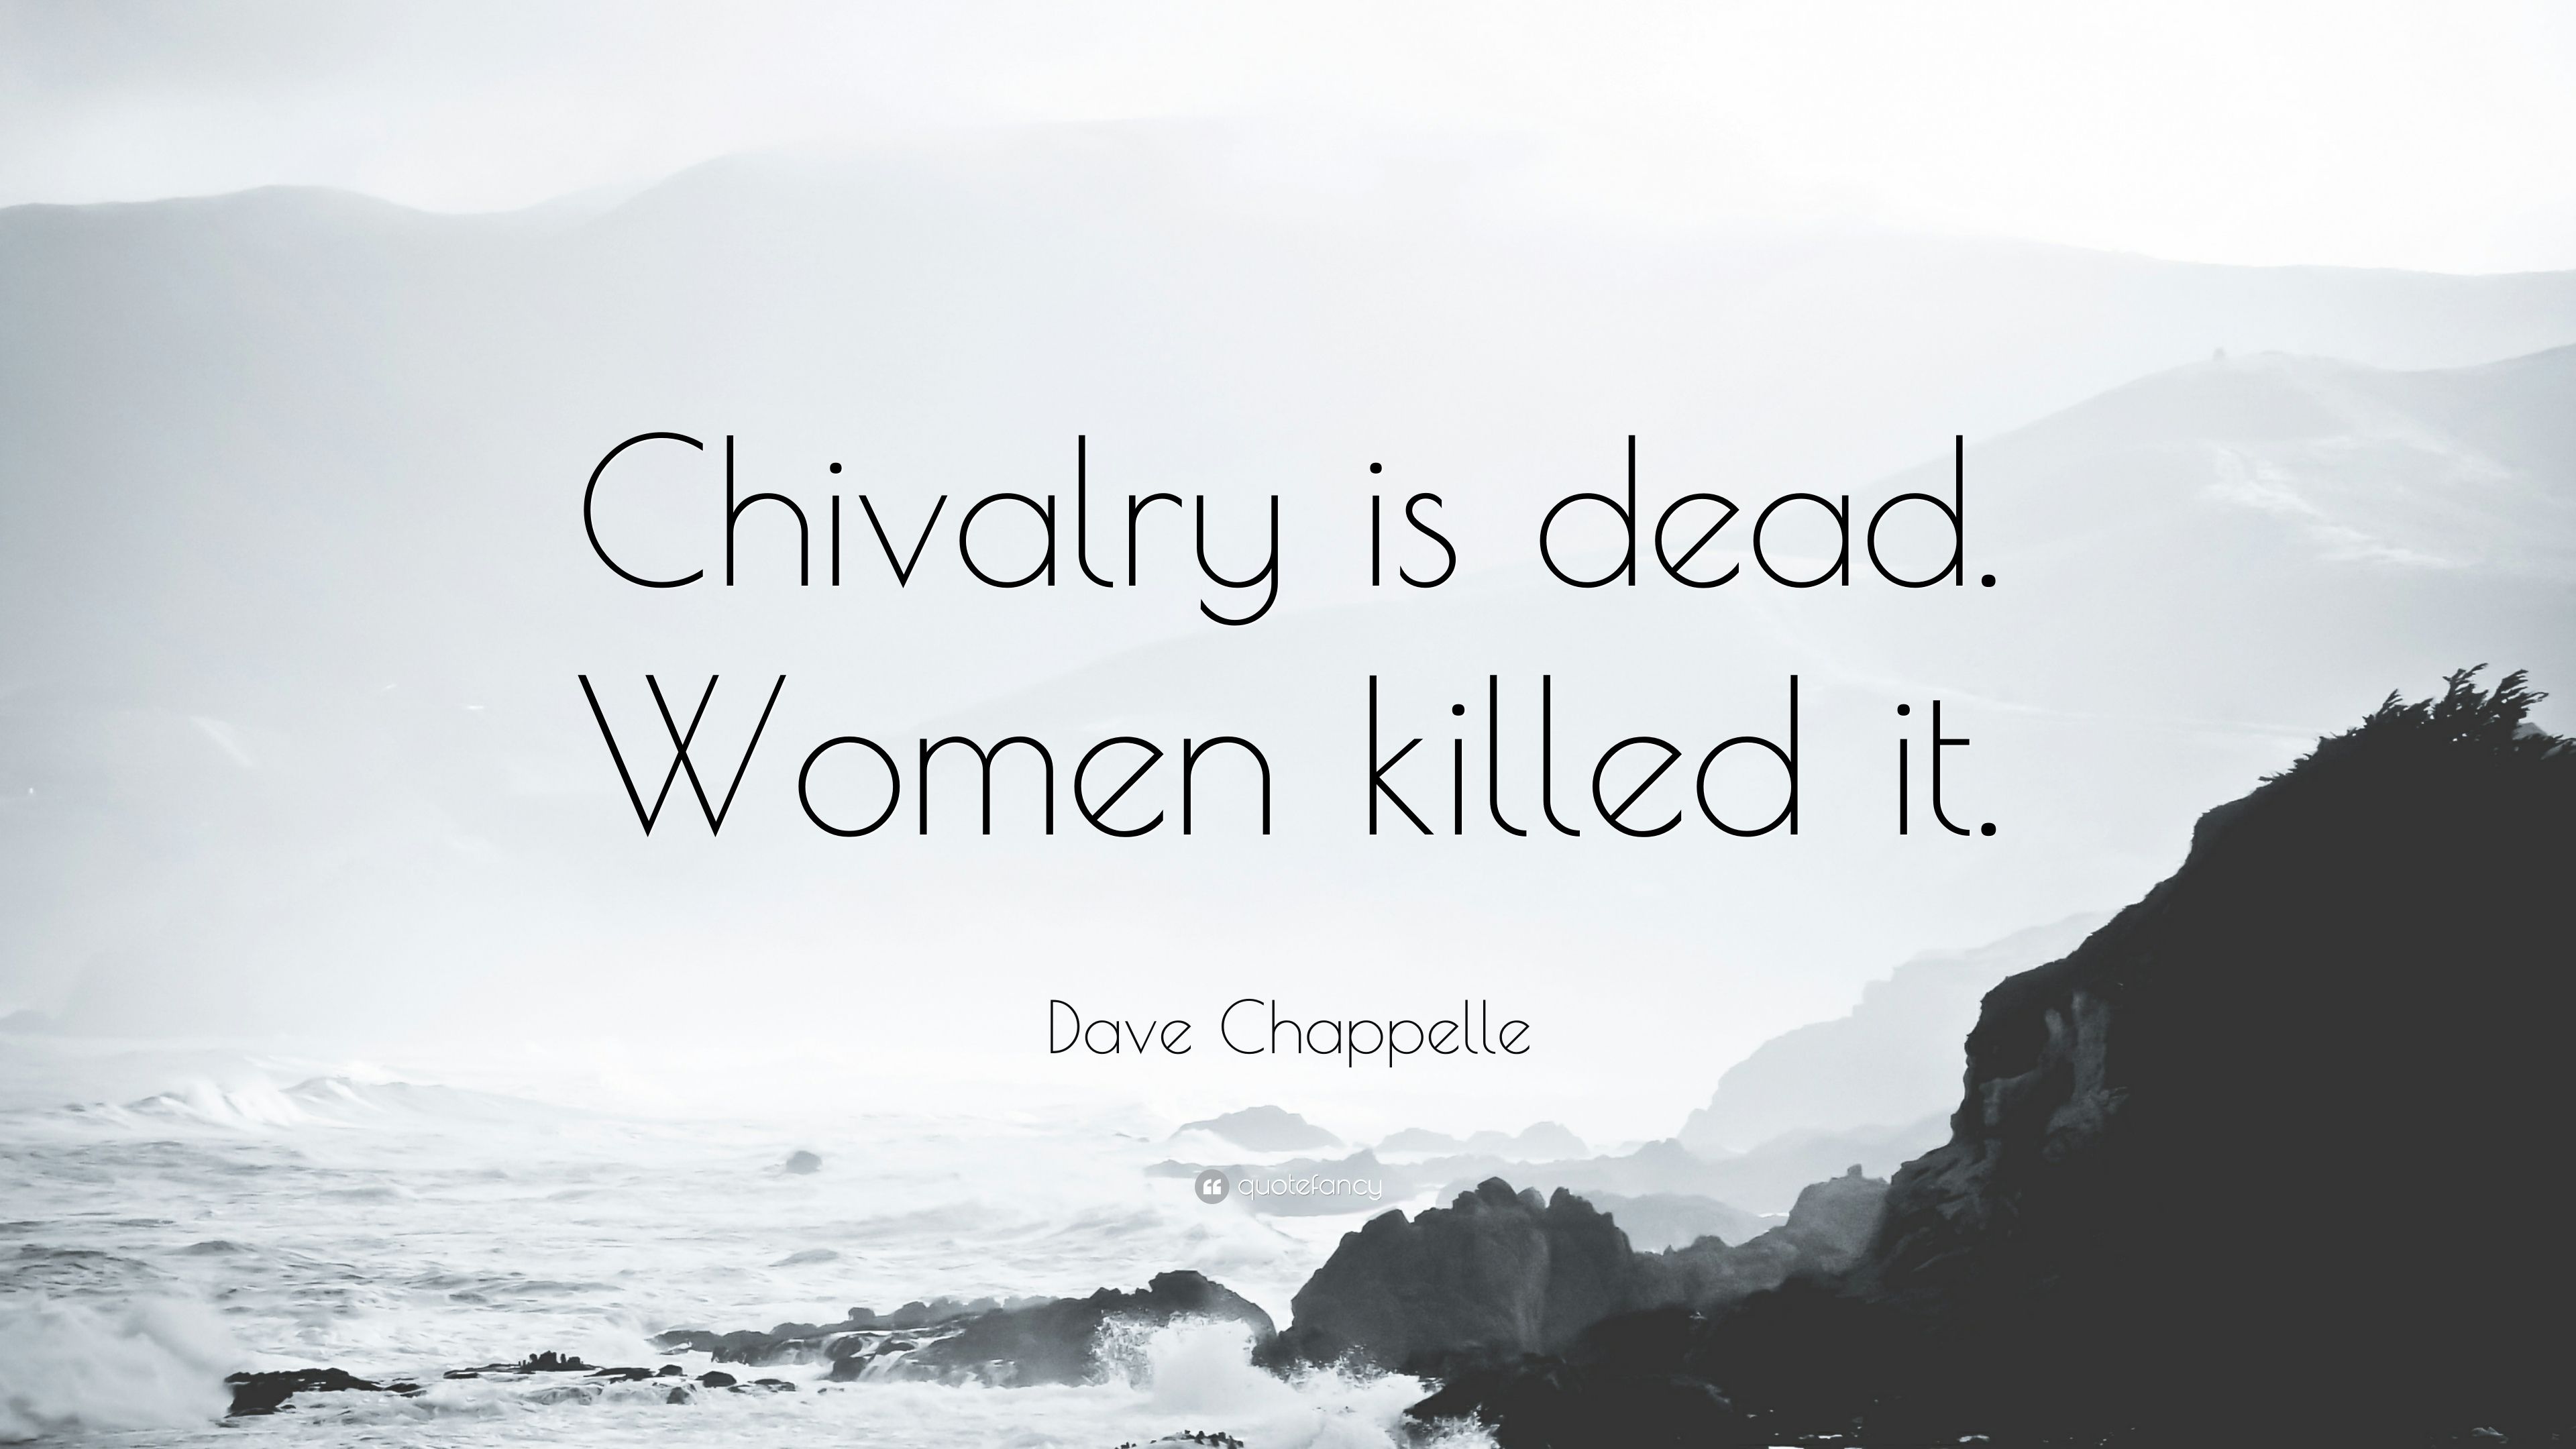 Dave Chappelle Quote: “Chivalry is dead. Women killed it.” 7